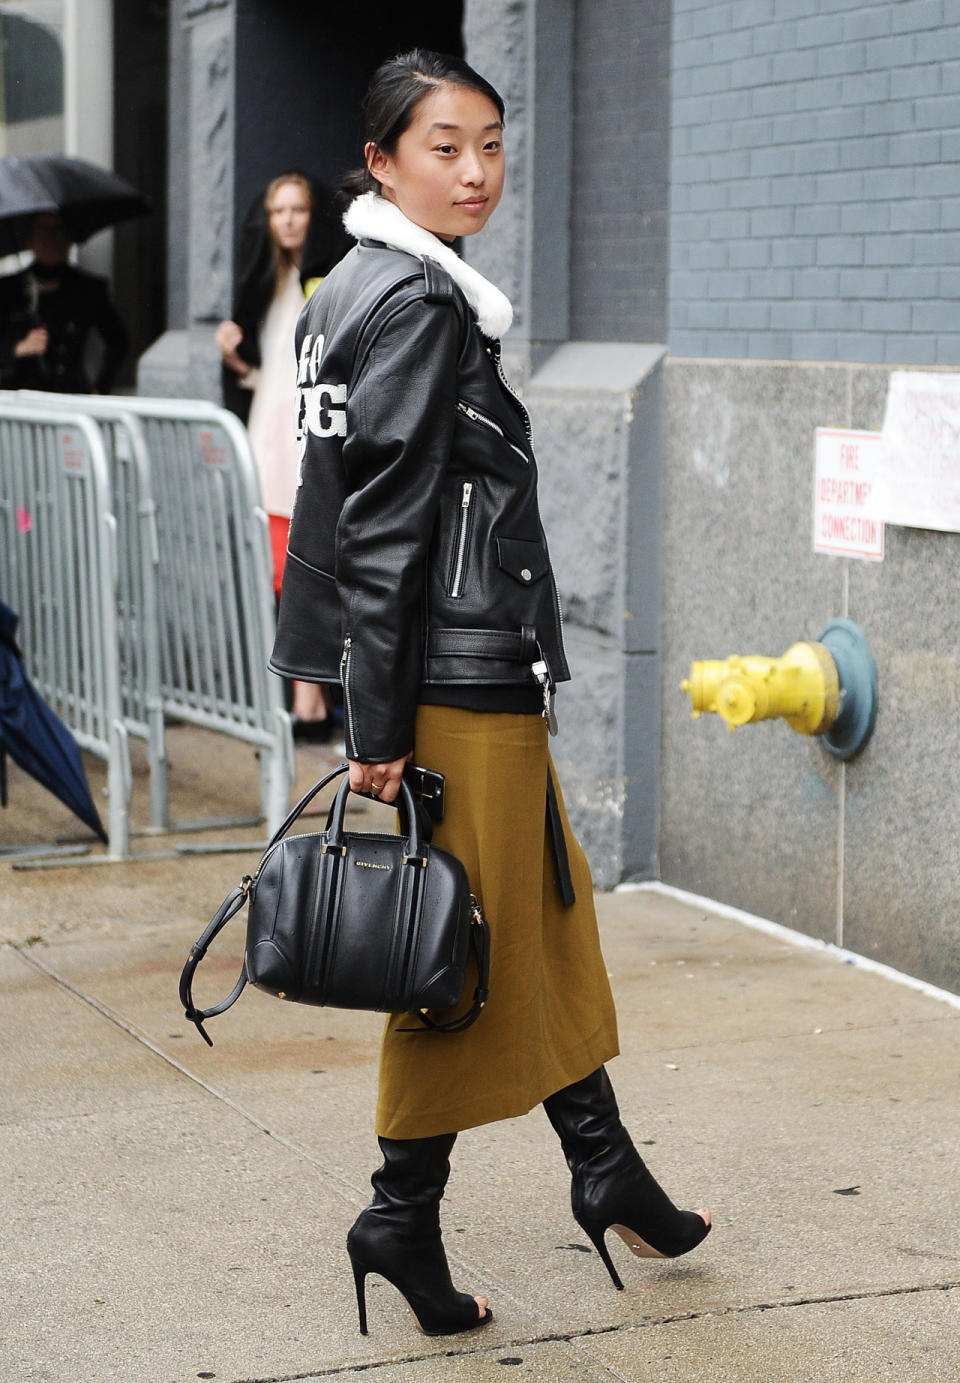 An outfit consisting of wool, leather and black boots at New York Fashion Week.